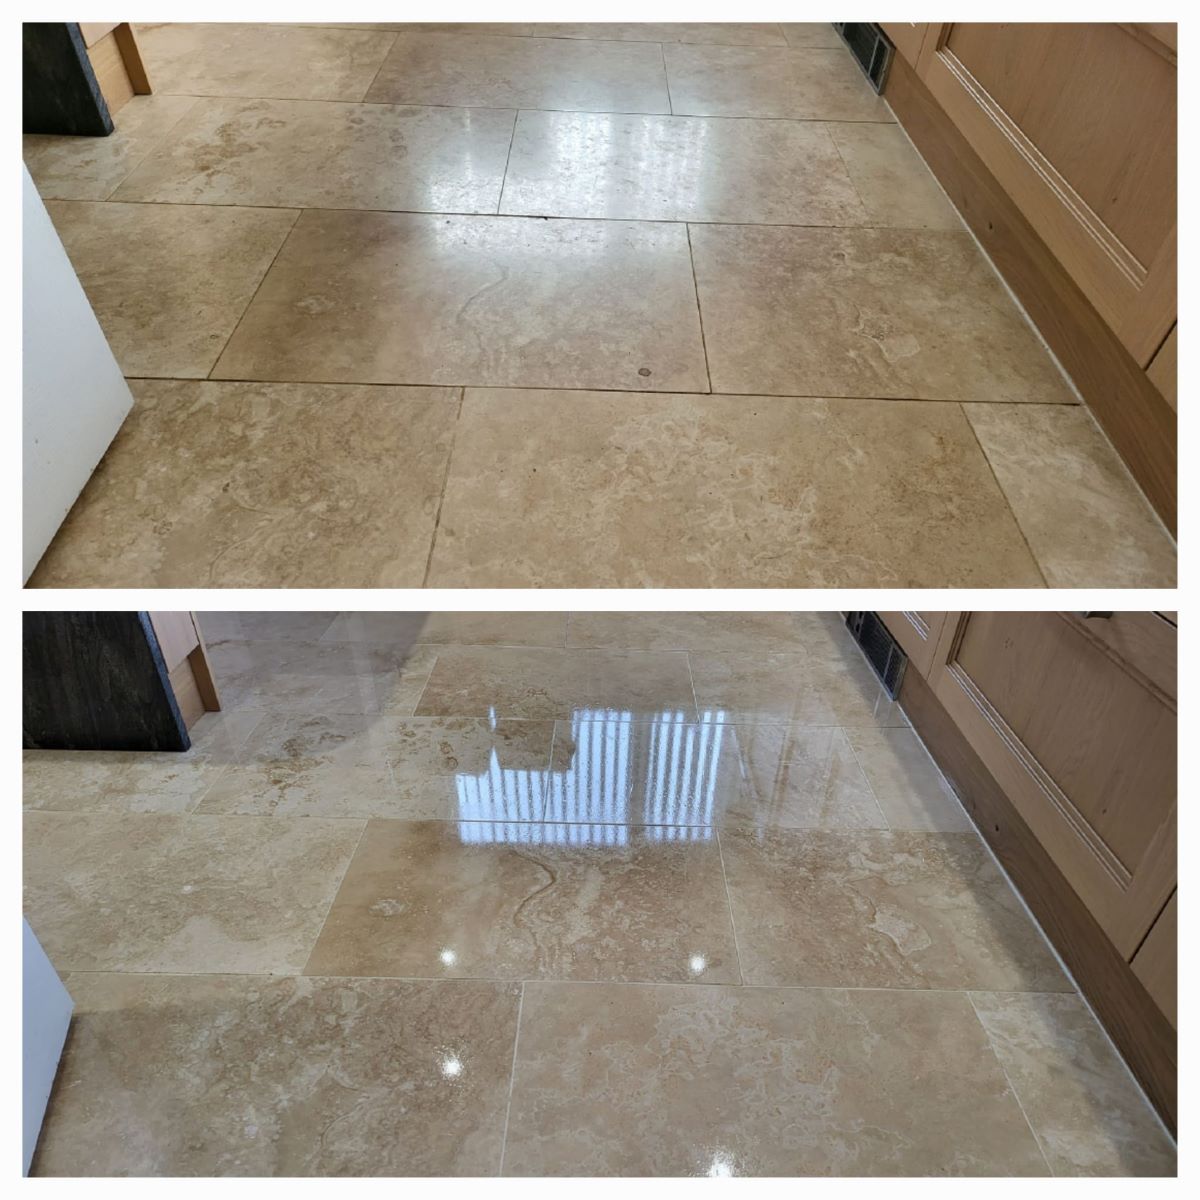 kitchen floor cleaning, before and after image